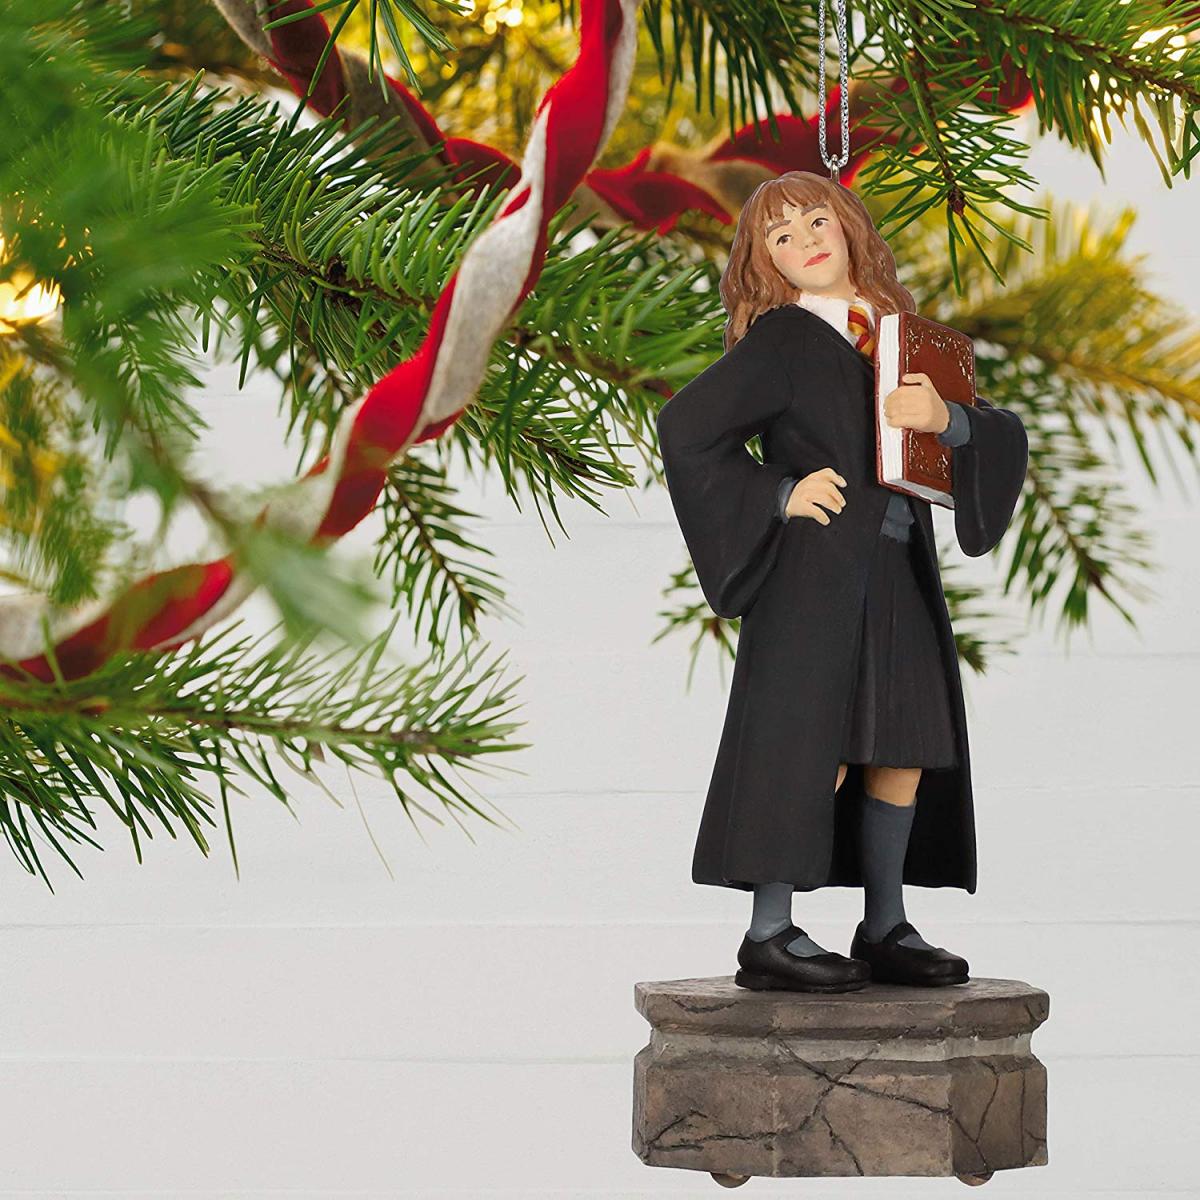 Harry Potter Christmas Tree Topper - Hermione Christmas Ornament